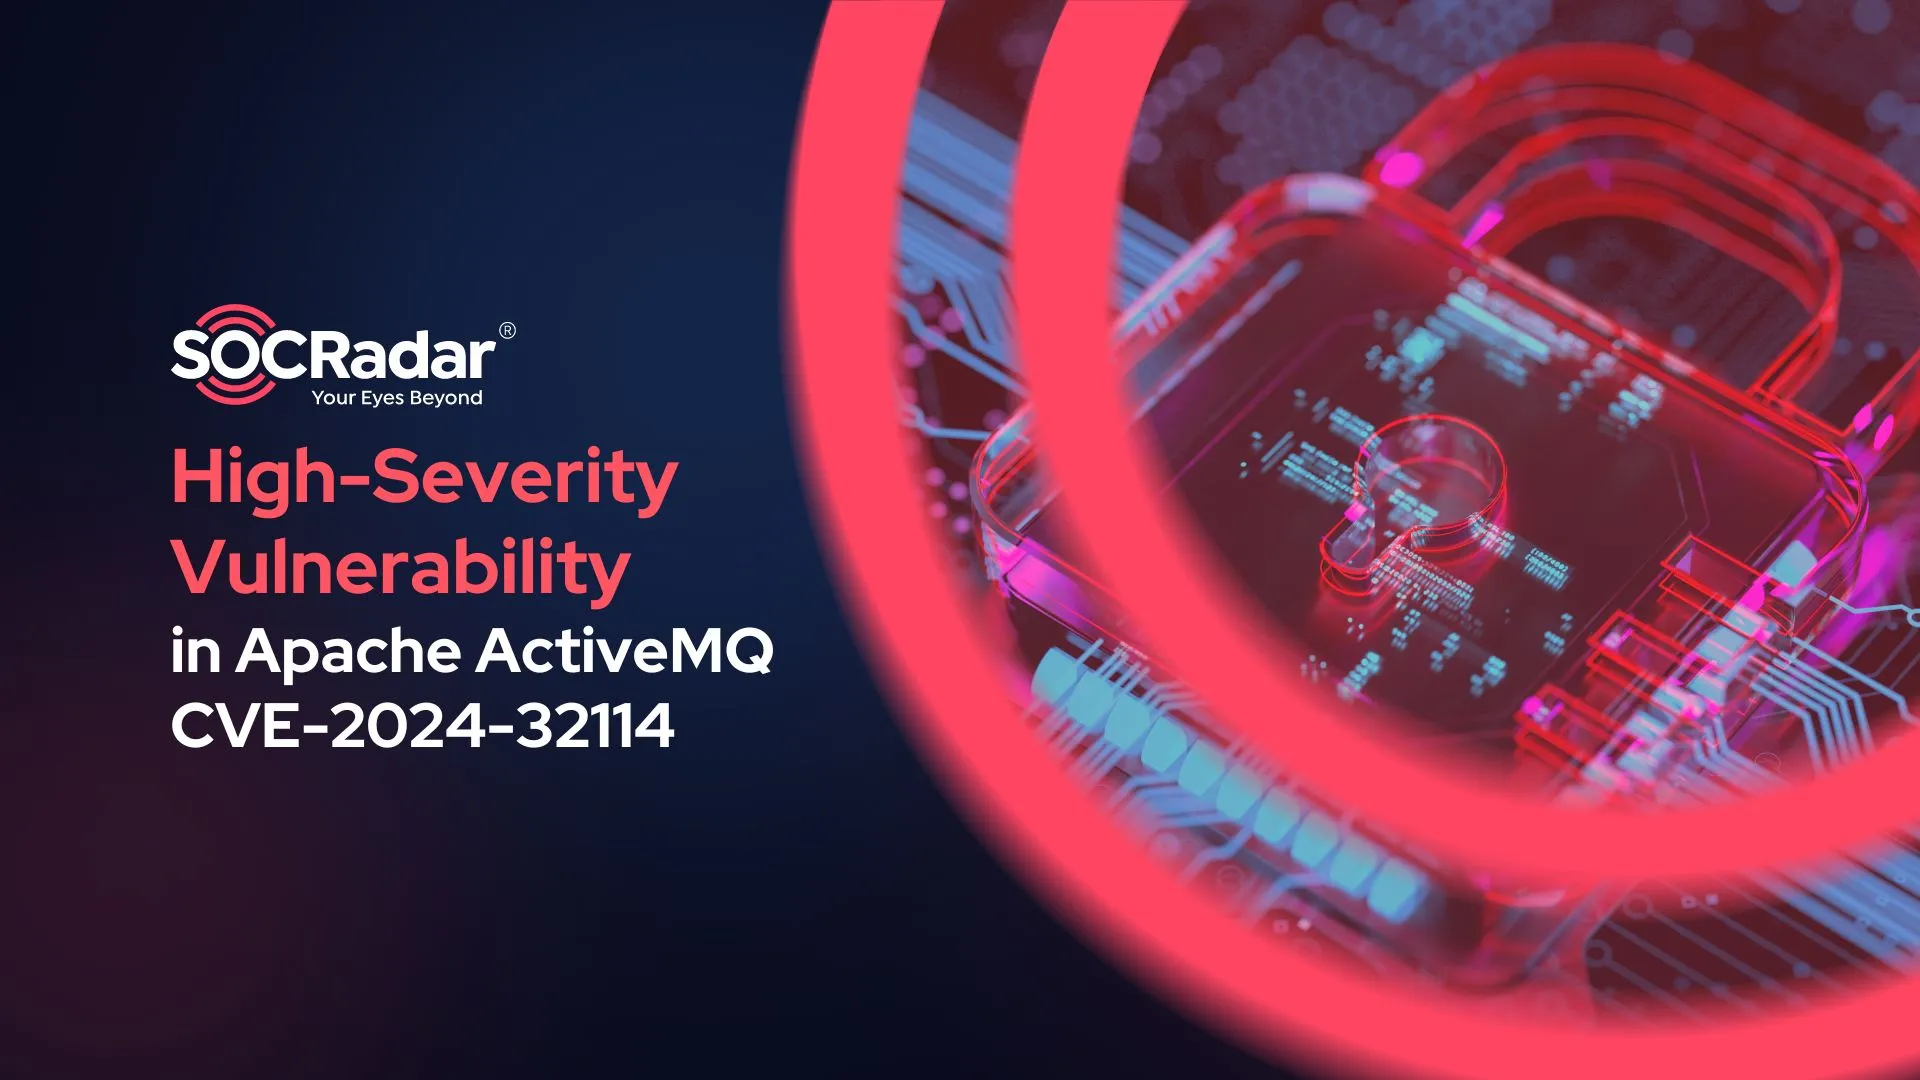 SOCRadar® Cyber Intelligence Inc. | New High-Severity Vulnerability in Apache ActiveMQ Poses Risk of Unauthorized Access: CVE-2024-32114